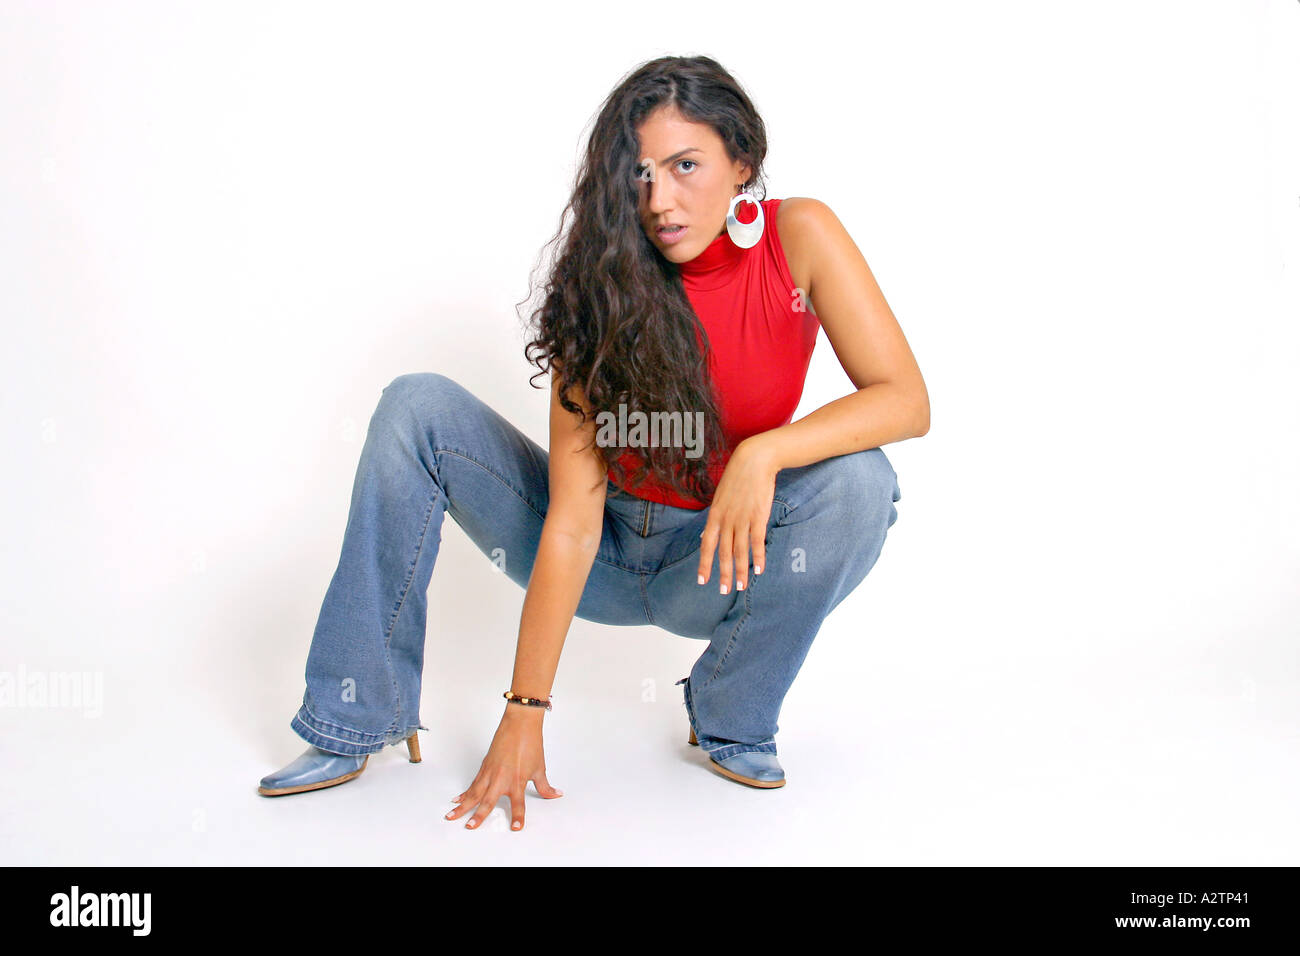 Full of Spanish girl with red top and jeans squatting Stock Photo - Alamy